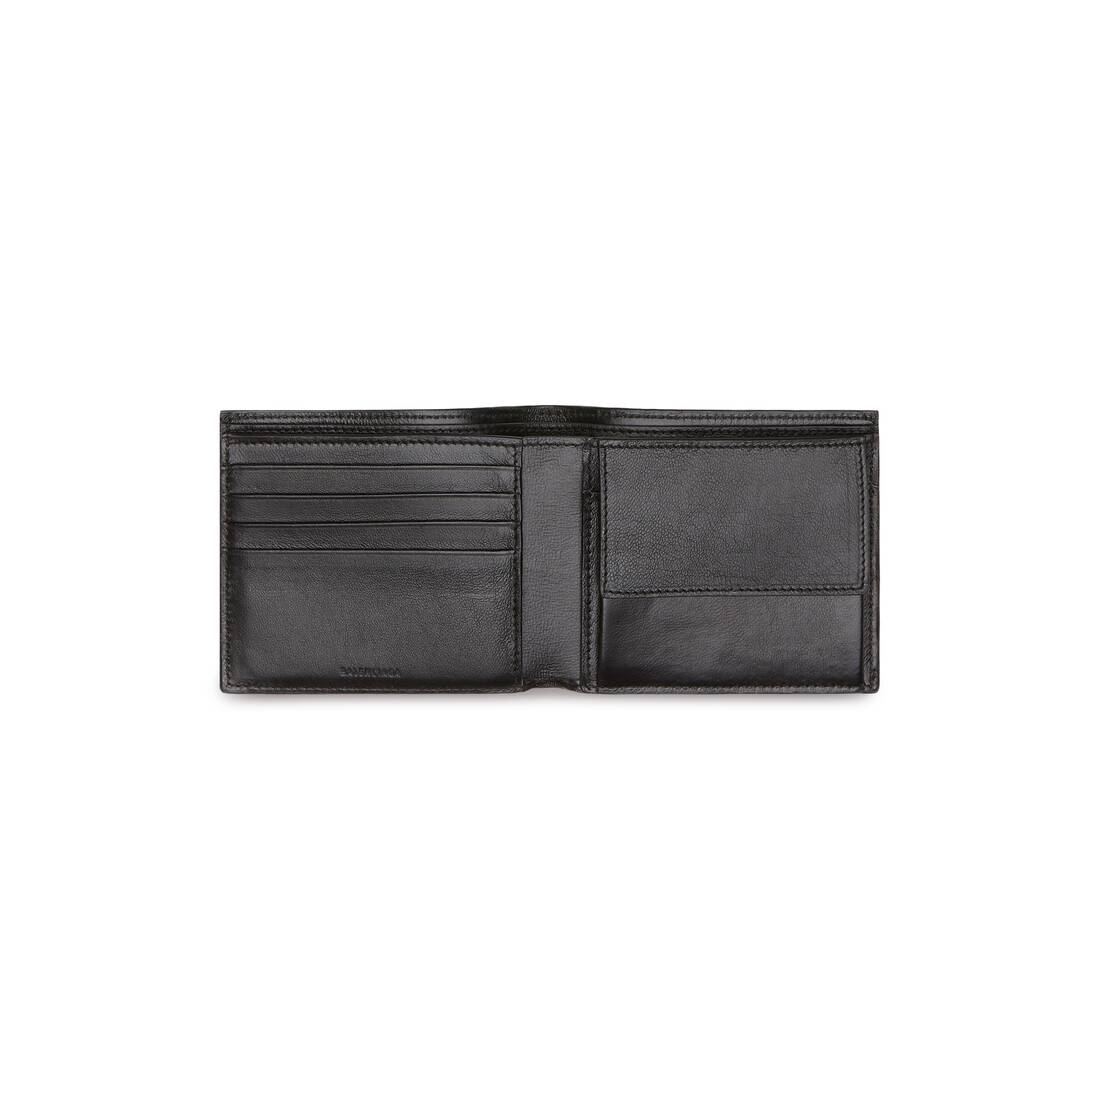 Men's Essential Square Folded Coin Wallet in Black